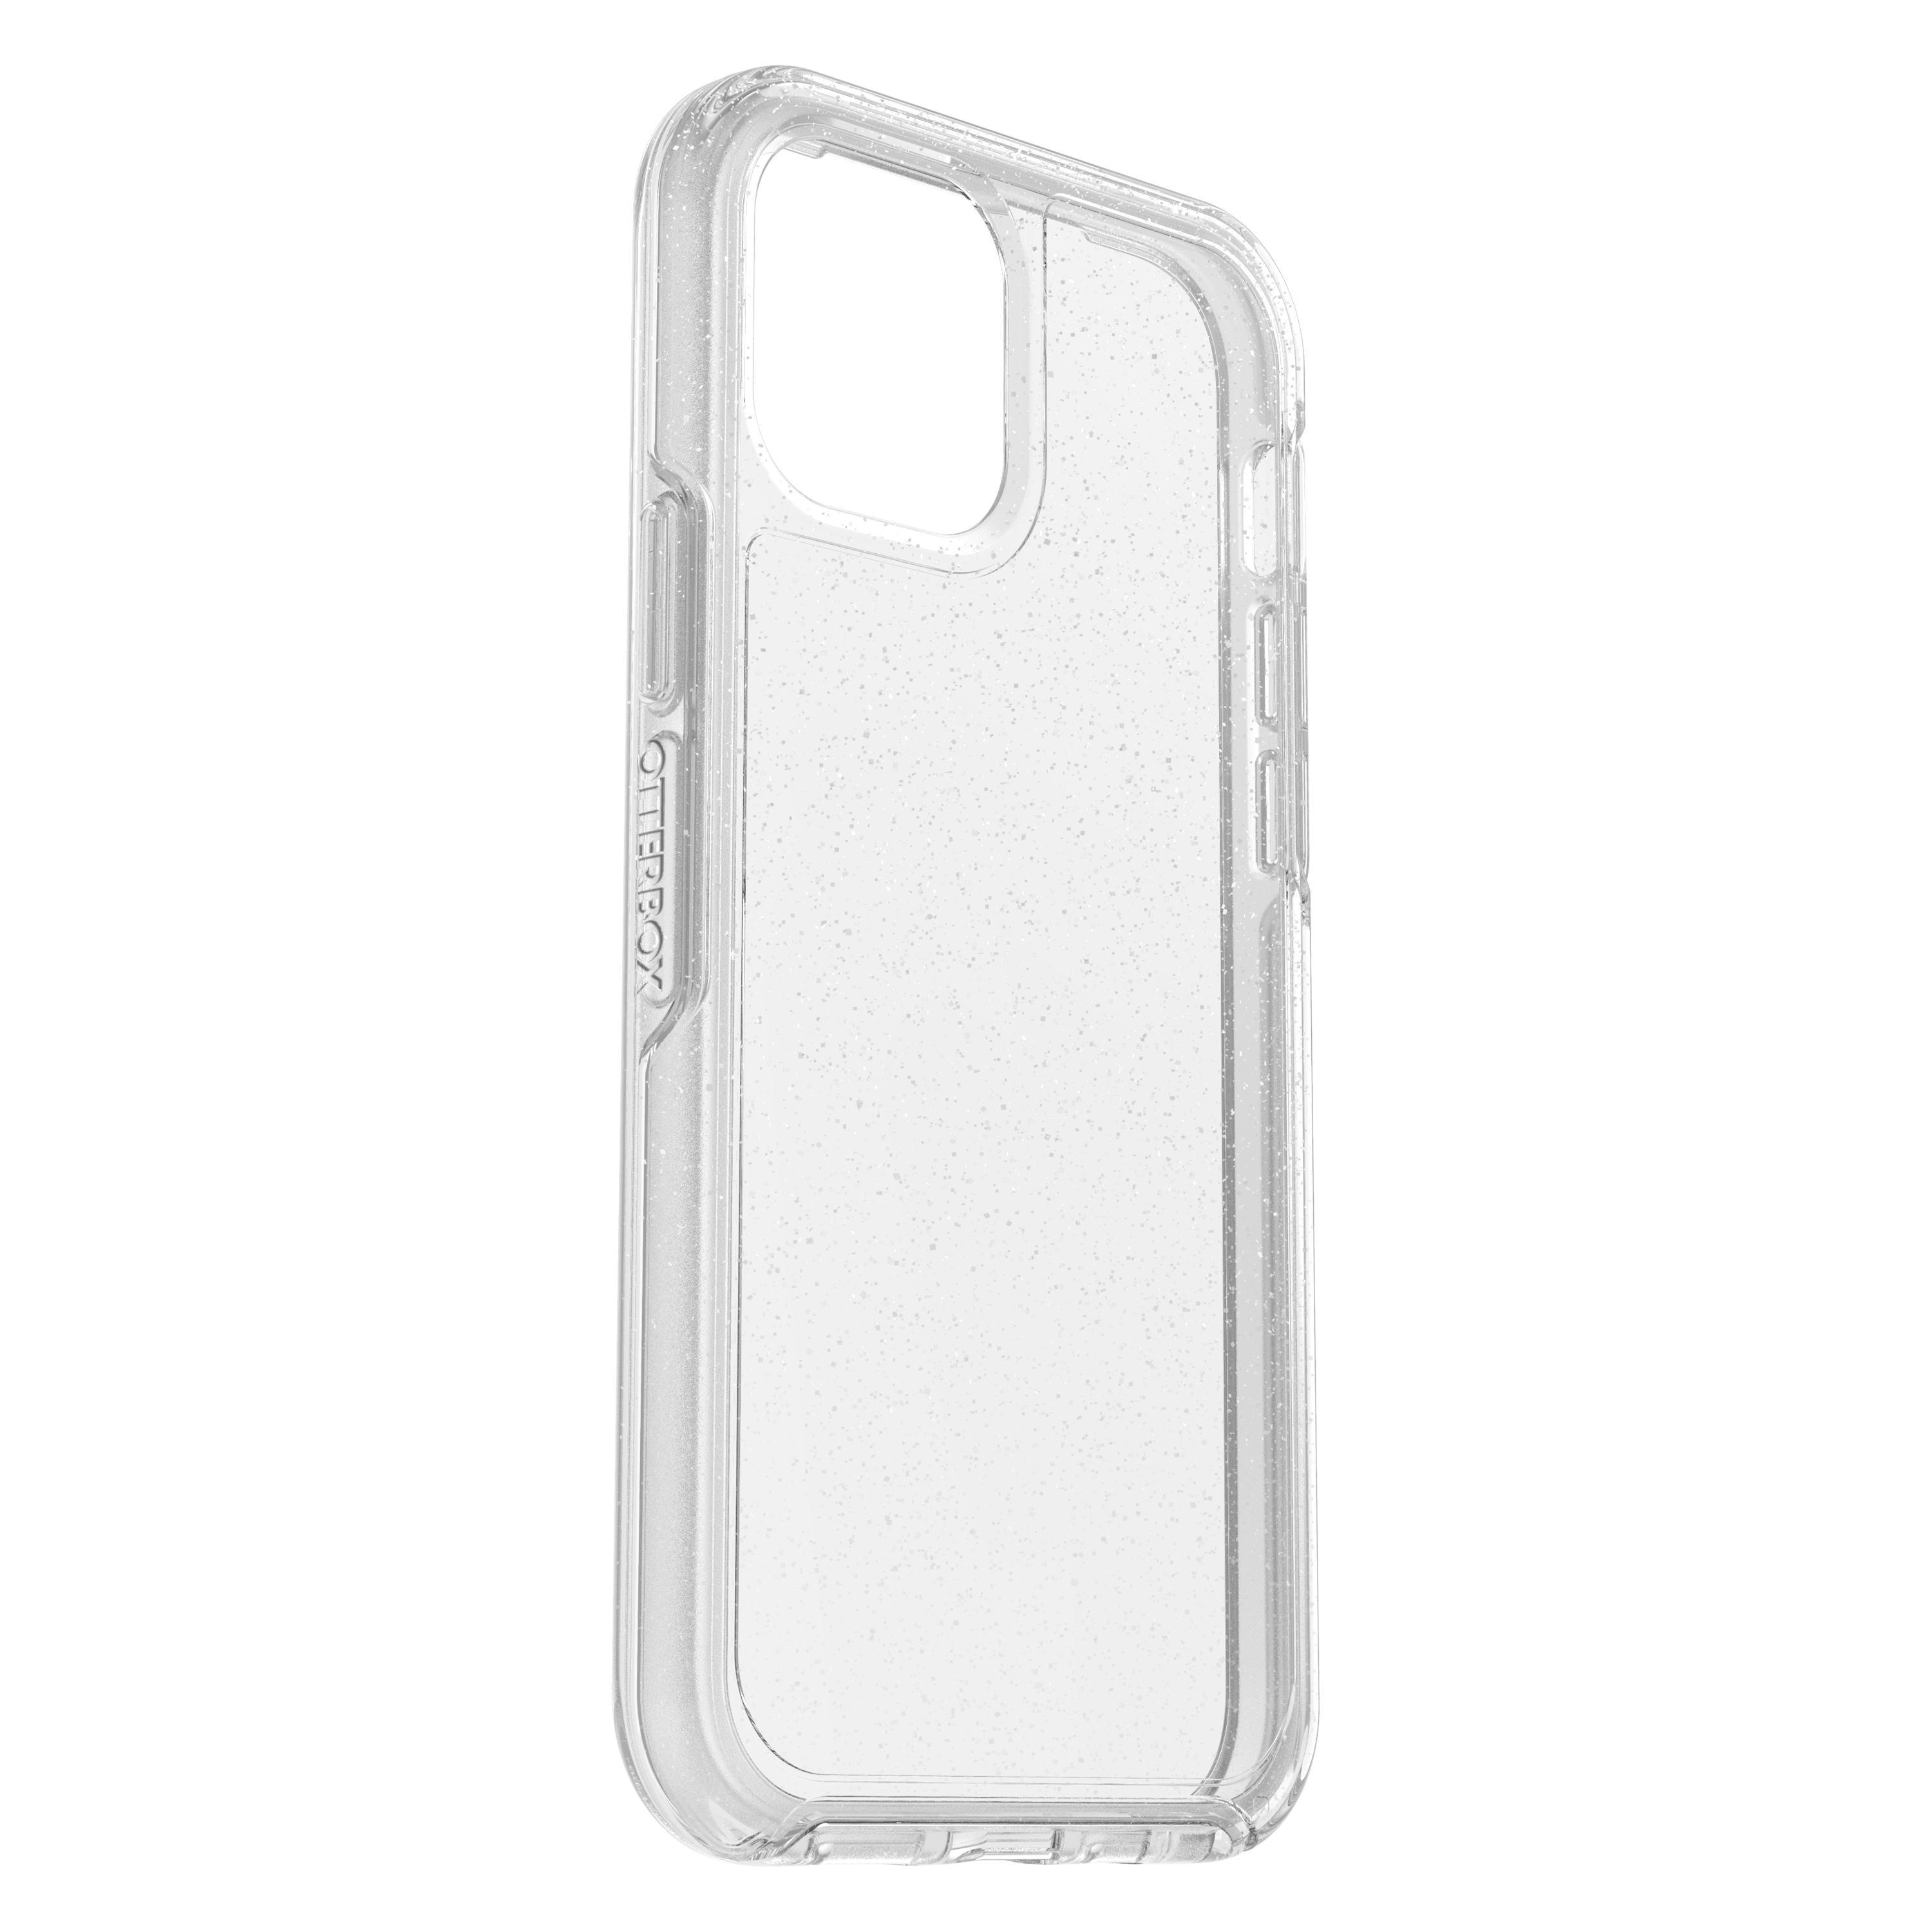 iPhone 12 Apple, Symmetry Pro, iPhone Backcover, Transparent/Glitzer 12, Clear , OTTERBOX